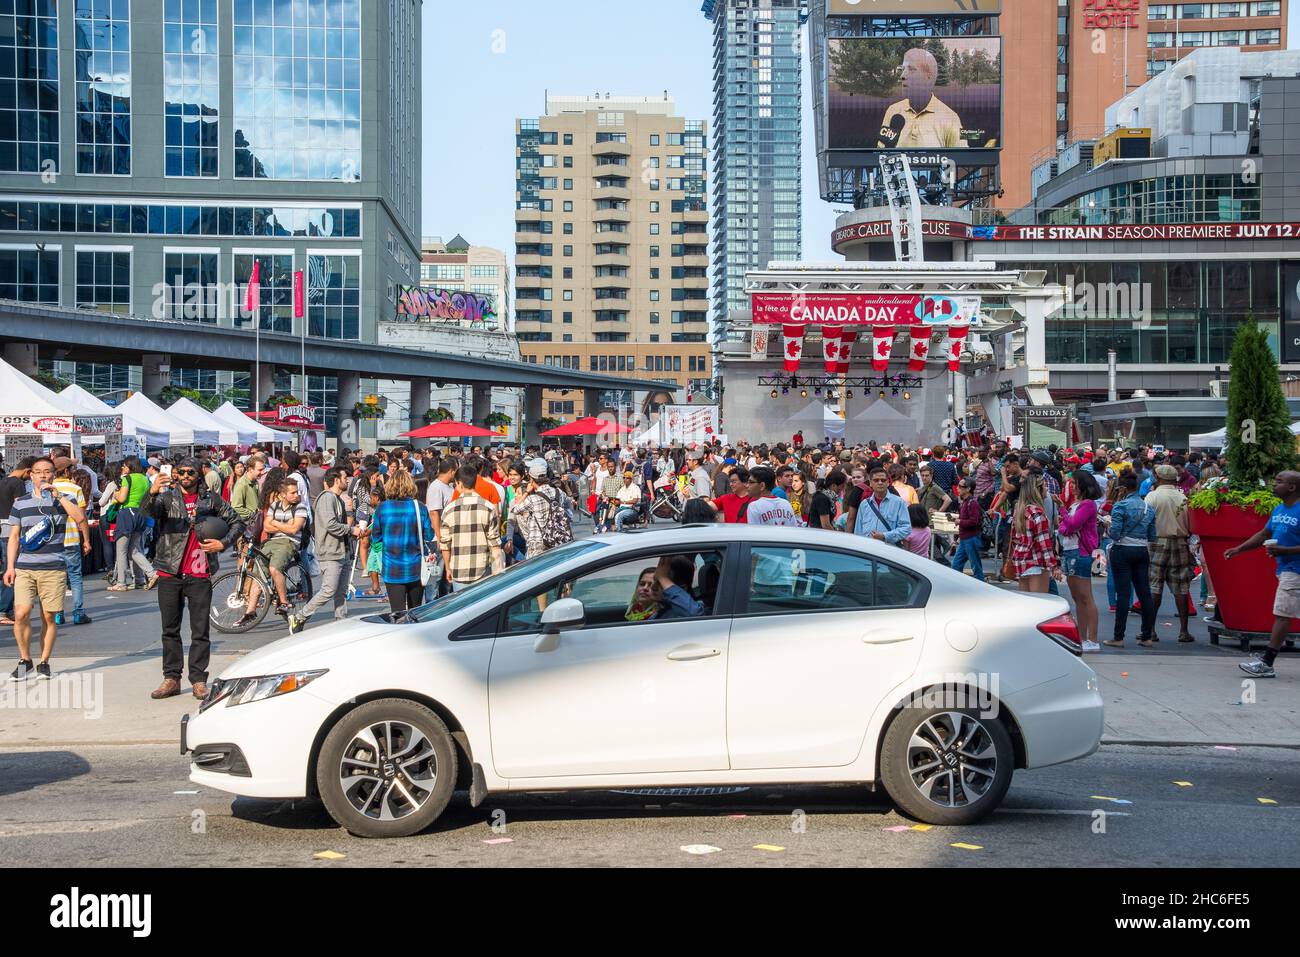 People crowd in Dundas Square the streets during Canada Day. Canada Day is celebrated annually and is a national holiday. Stock Photo